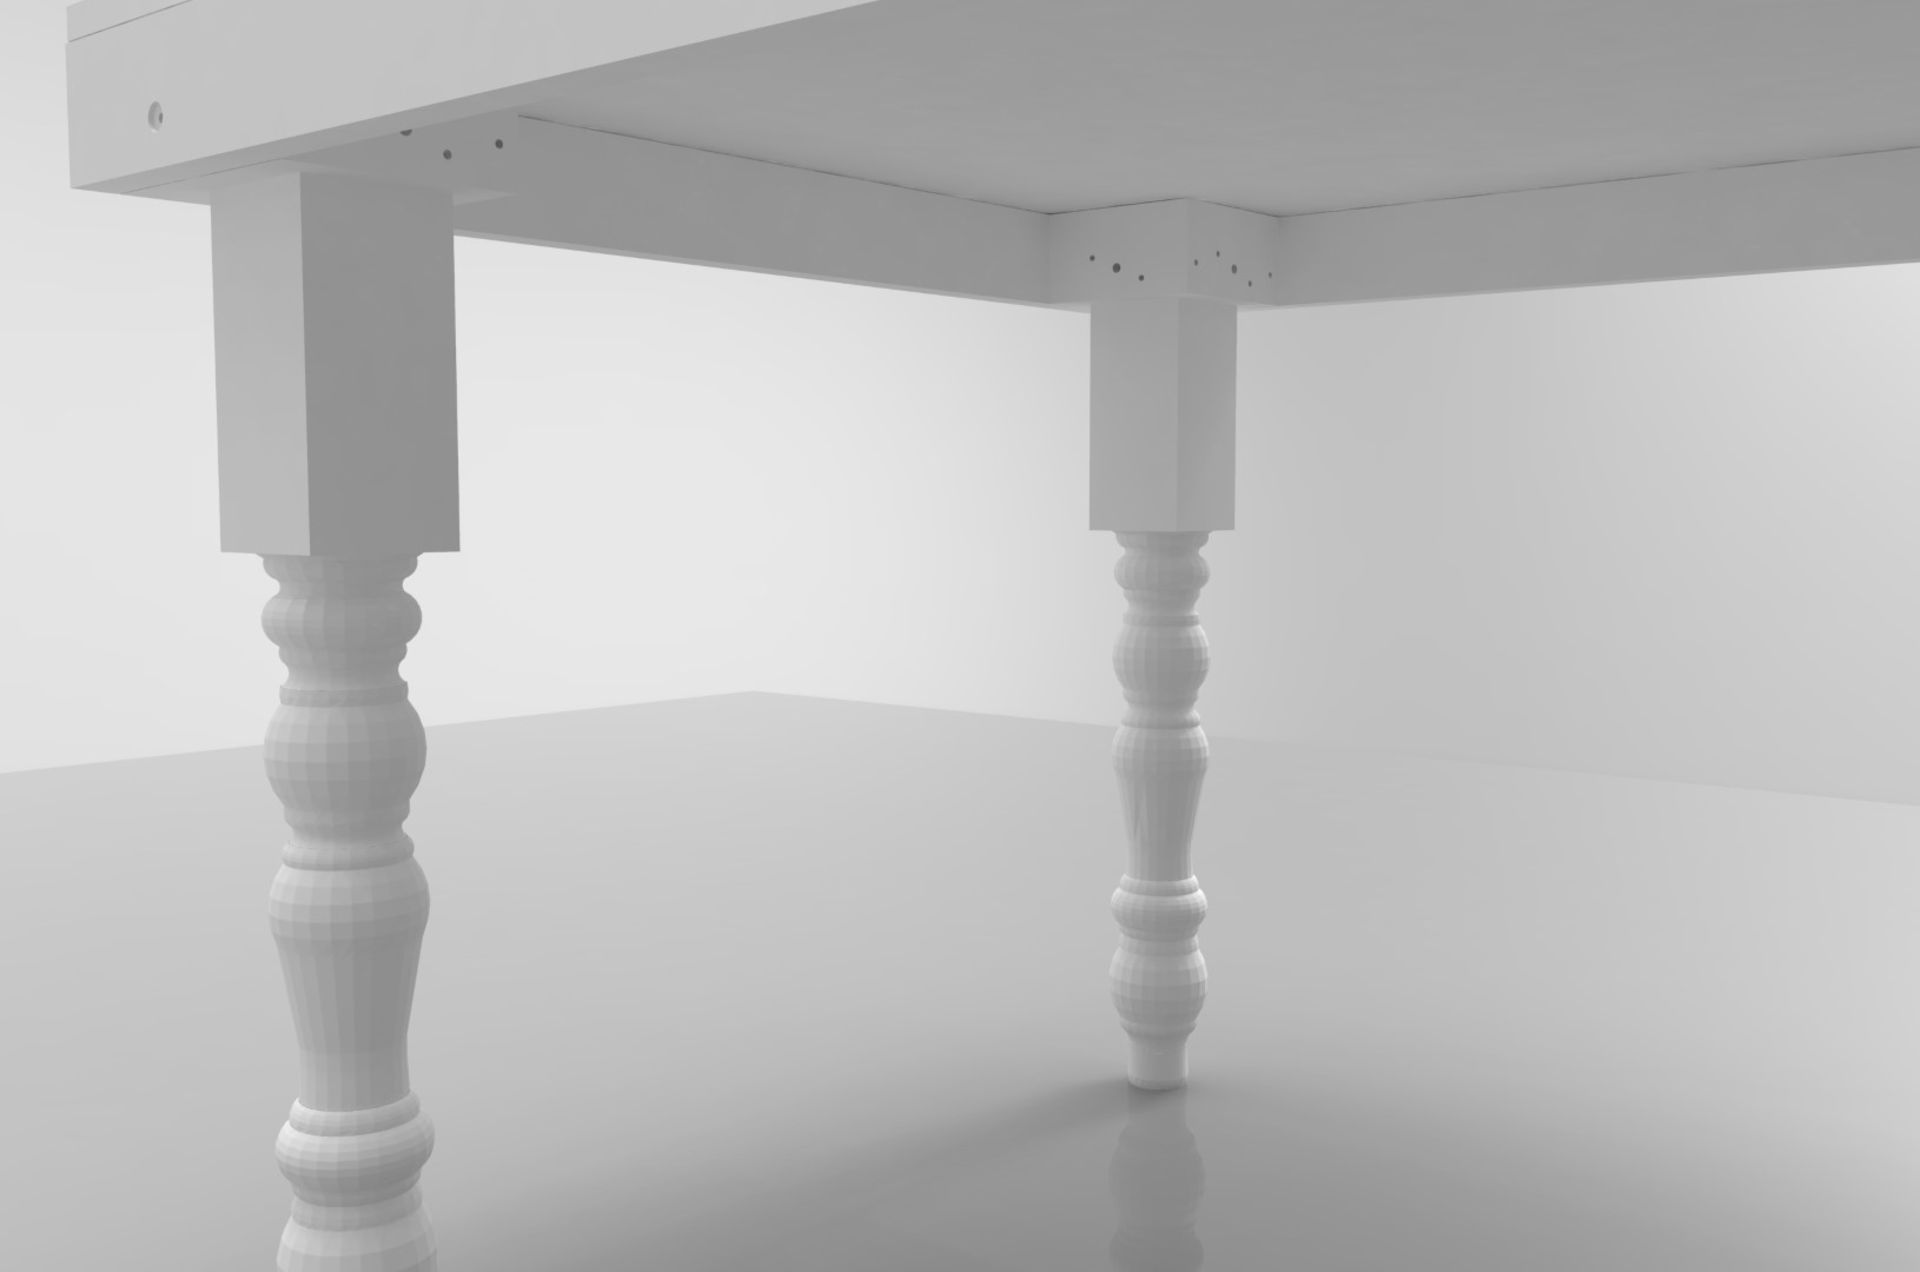 5 x Bespoke Rectangular Commercial Event / Dining Tables In White - Dimensions: 198cm x D99 x H74cm - Image 3 of 5